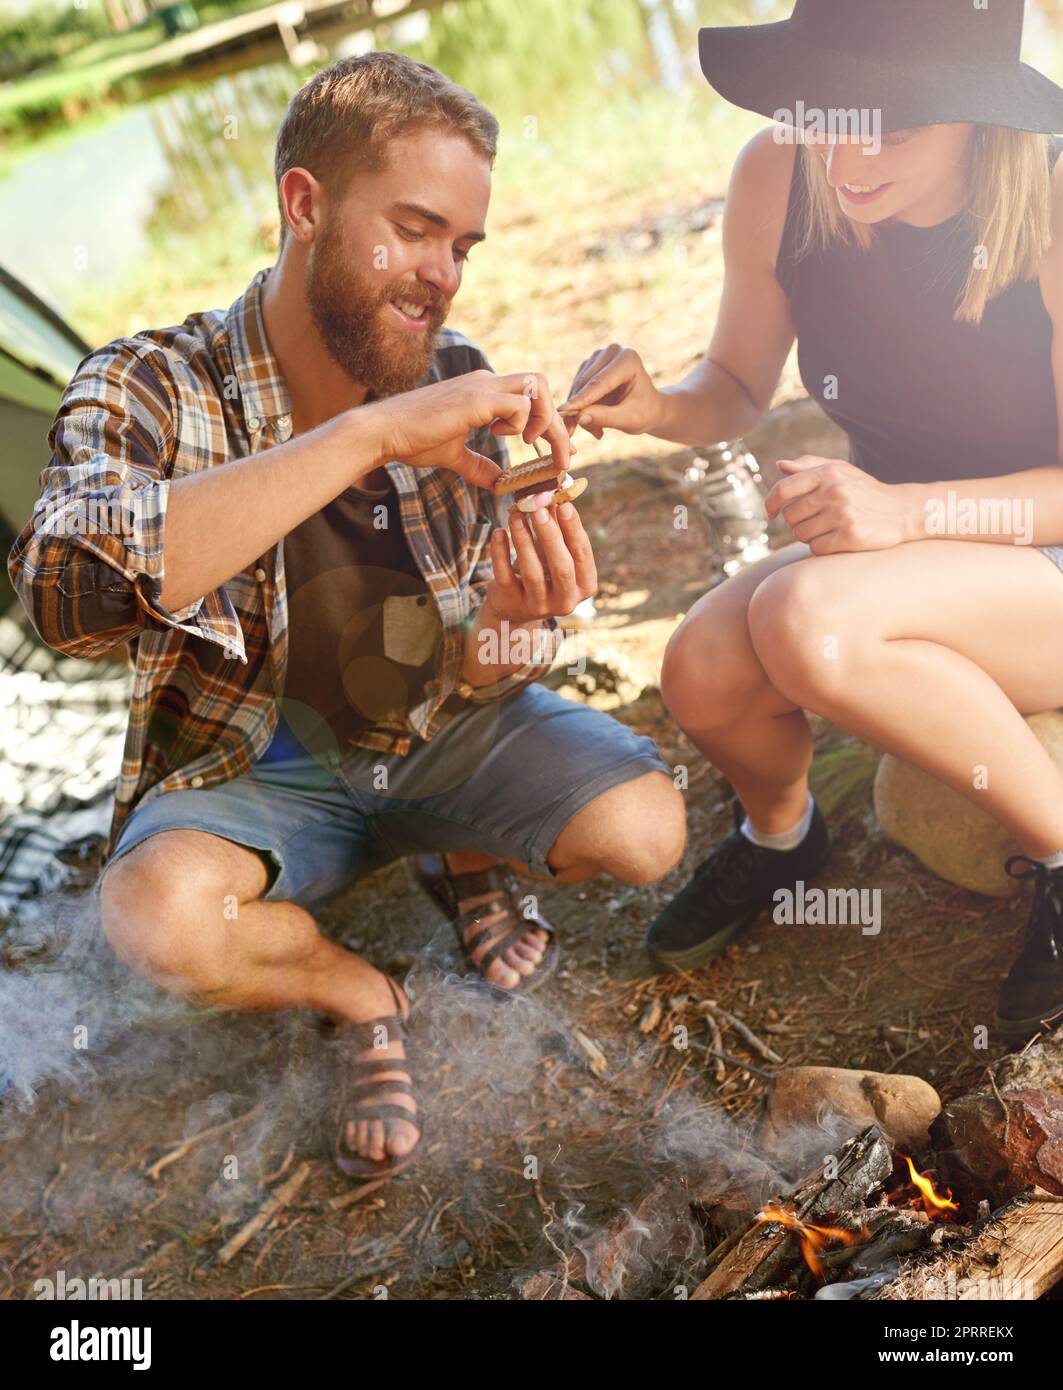 Building the perfect smore. a young couple making smores while camping. Stock Photo